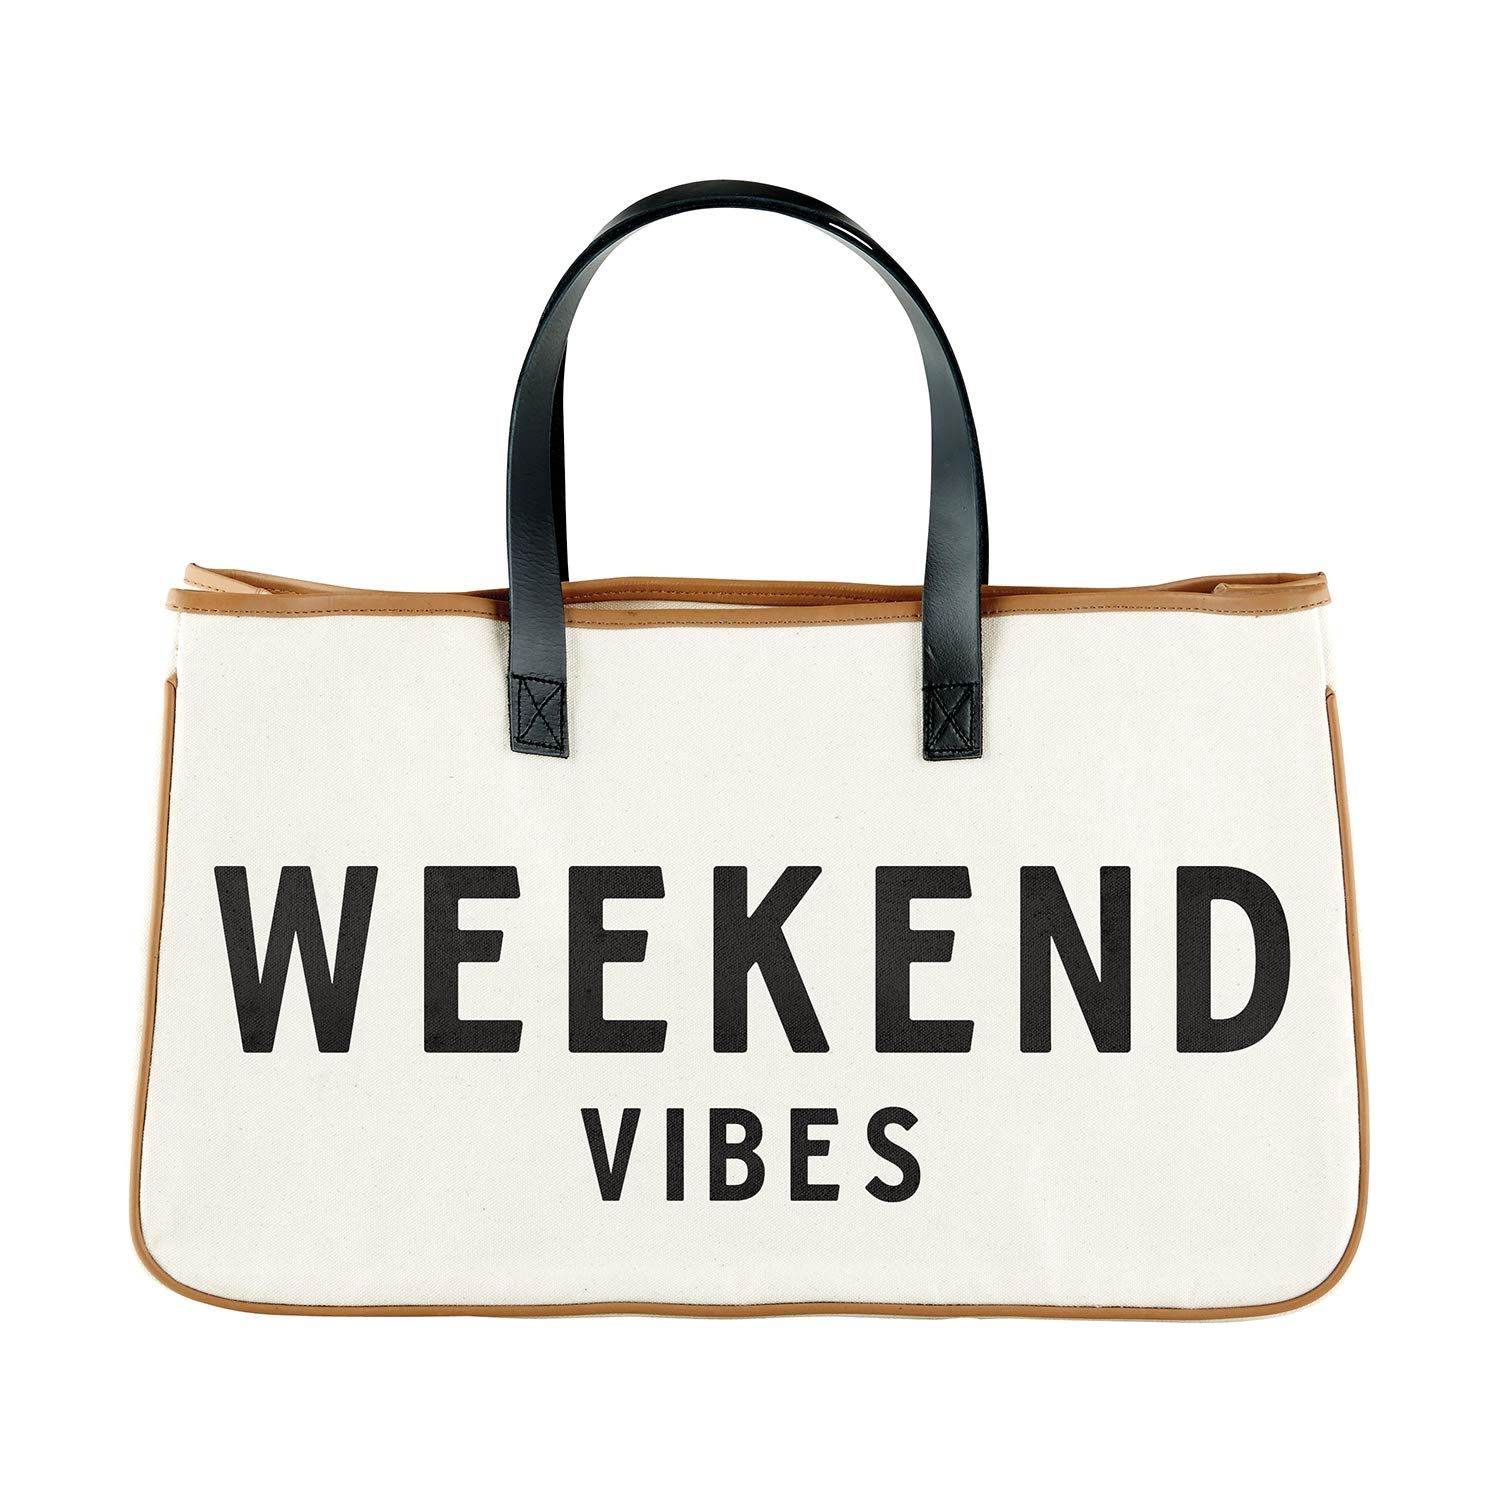 Creative Brands D3712 Hold Everything Tote Bag, 20" x 11", Weekend Vibes | Amazon (US)